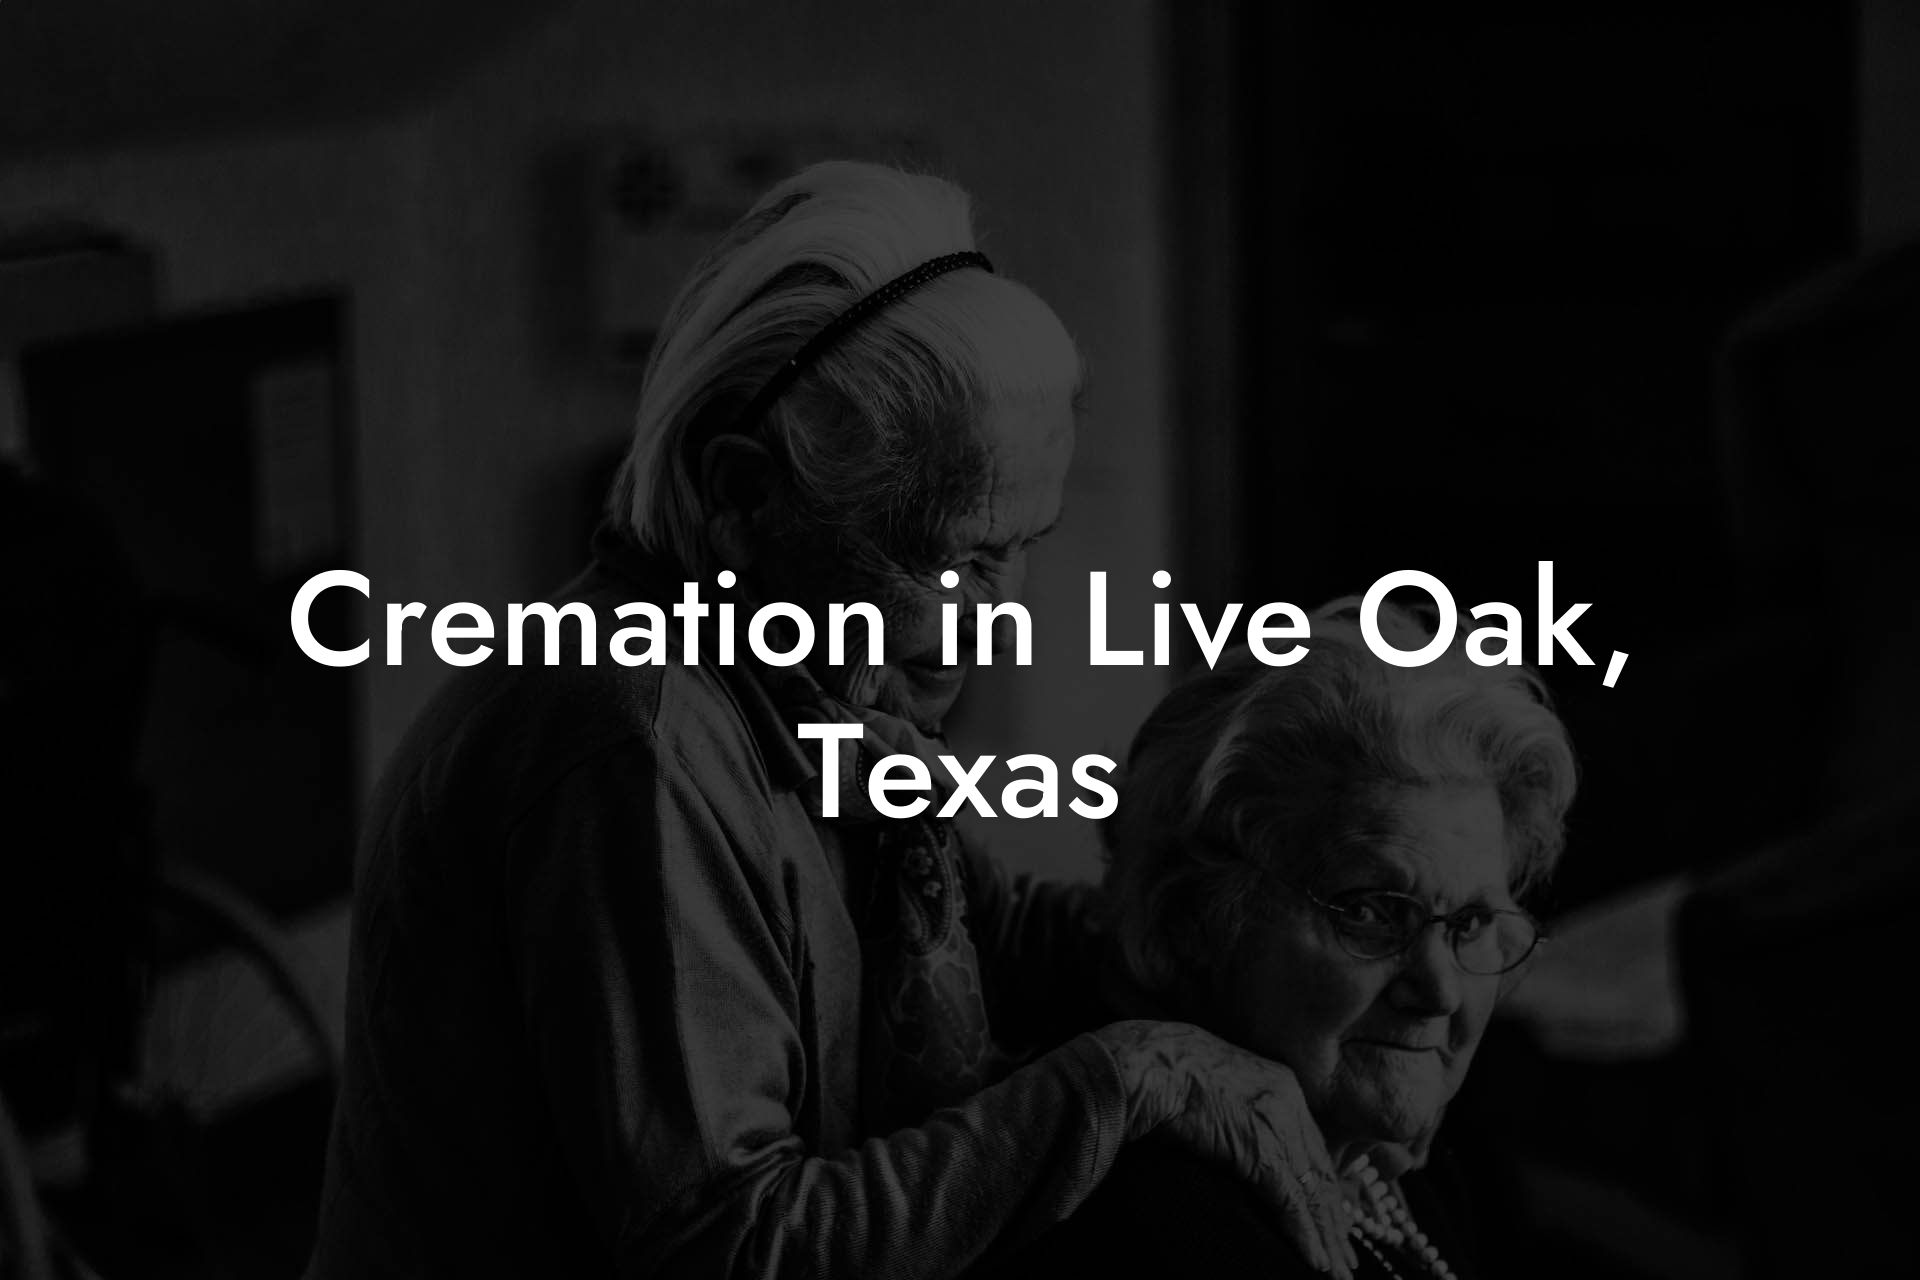 Cremation in Live Oak, Texas